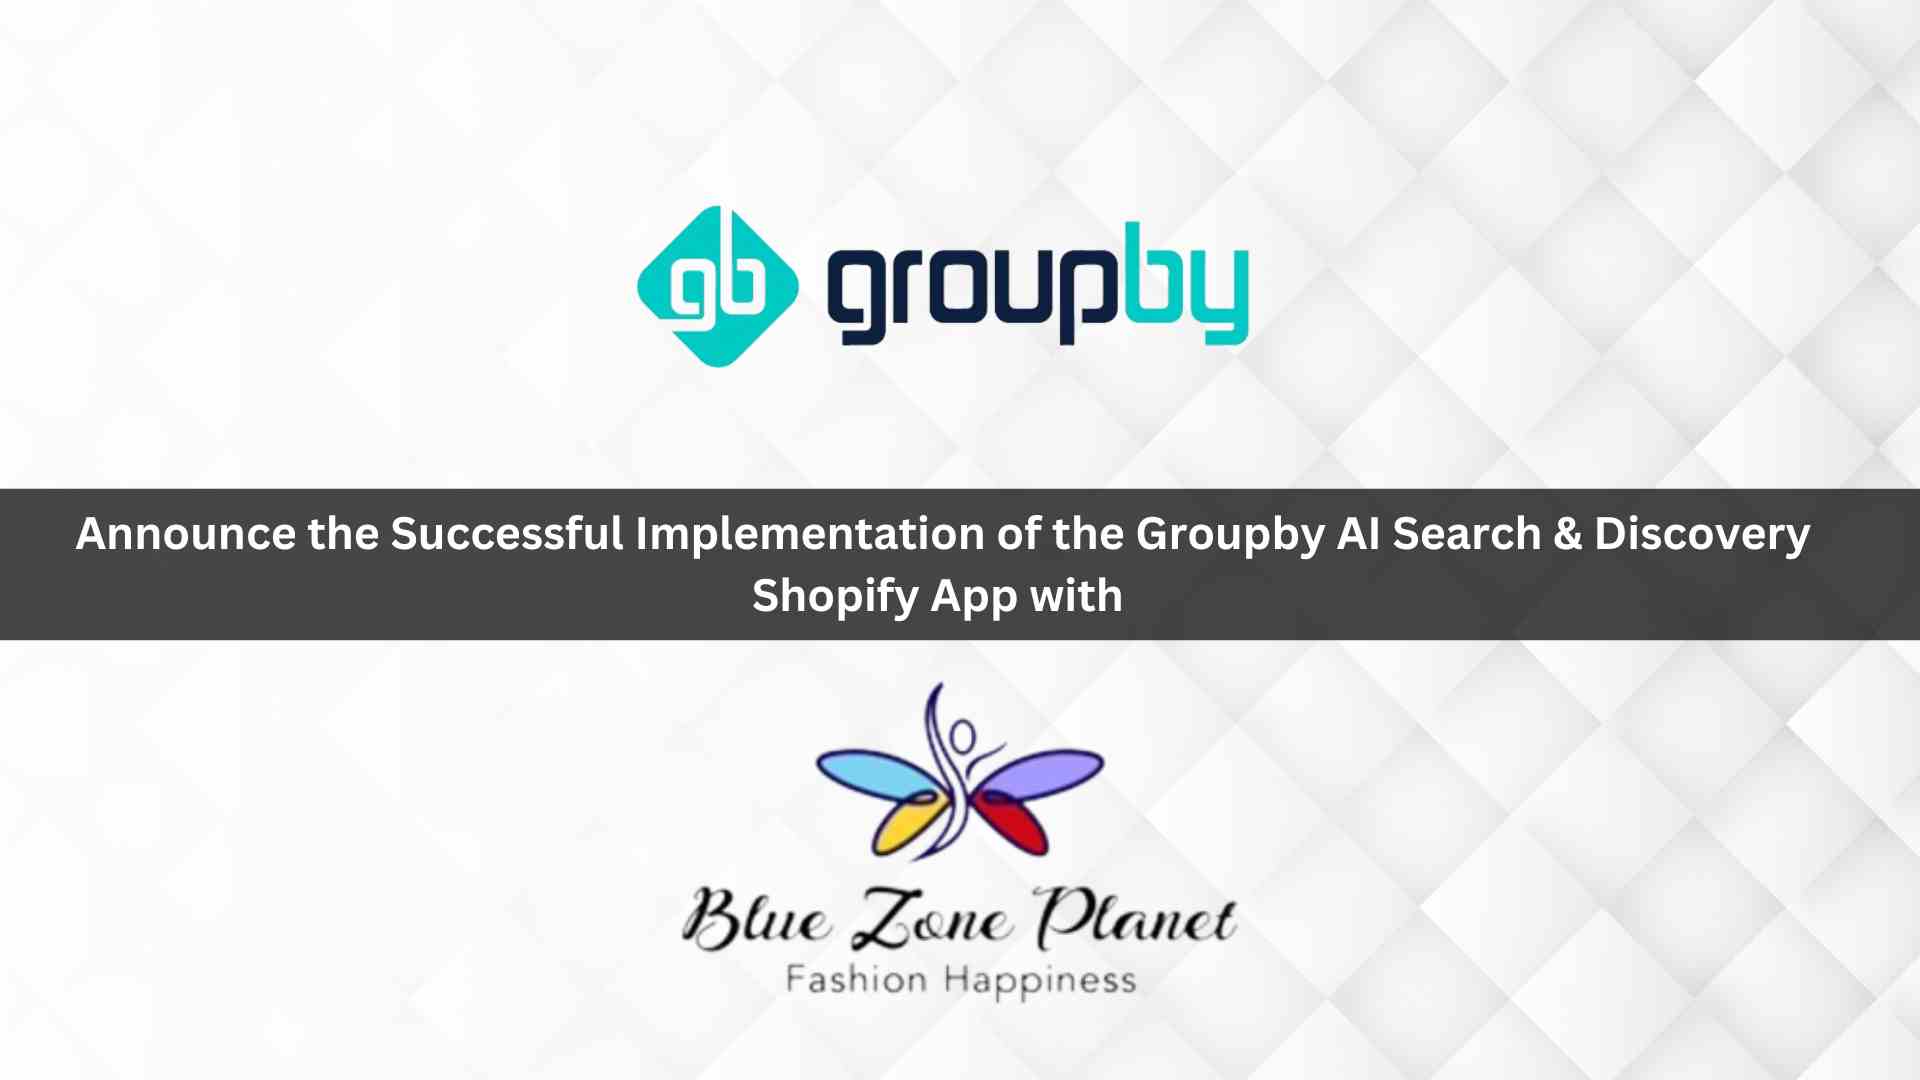 Blue Zone Planet Installs the GroupBy AI Search & Discovery Shopify App to Improve their Digital Customer Experience and Product Findability